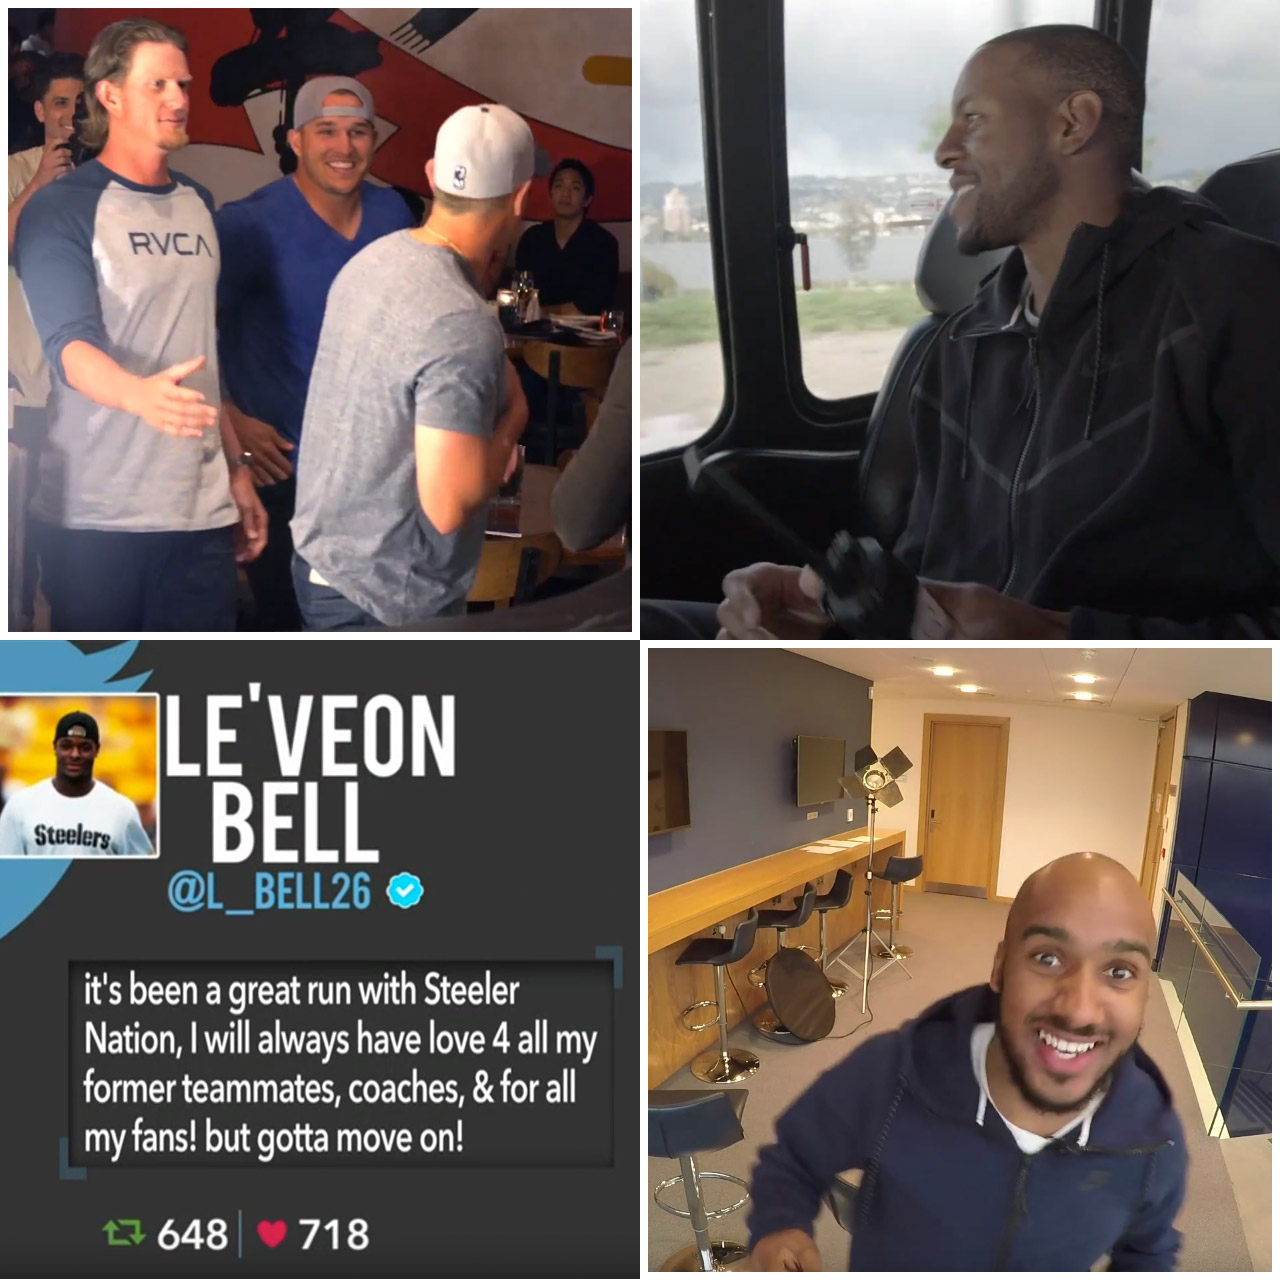 April Fools' Day pranks with Mike Trout, Andre Iguodala, Le'Veon Bell and Fabian Delph